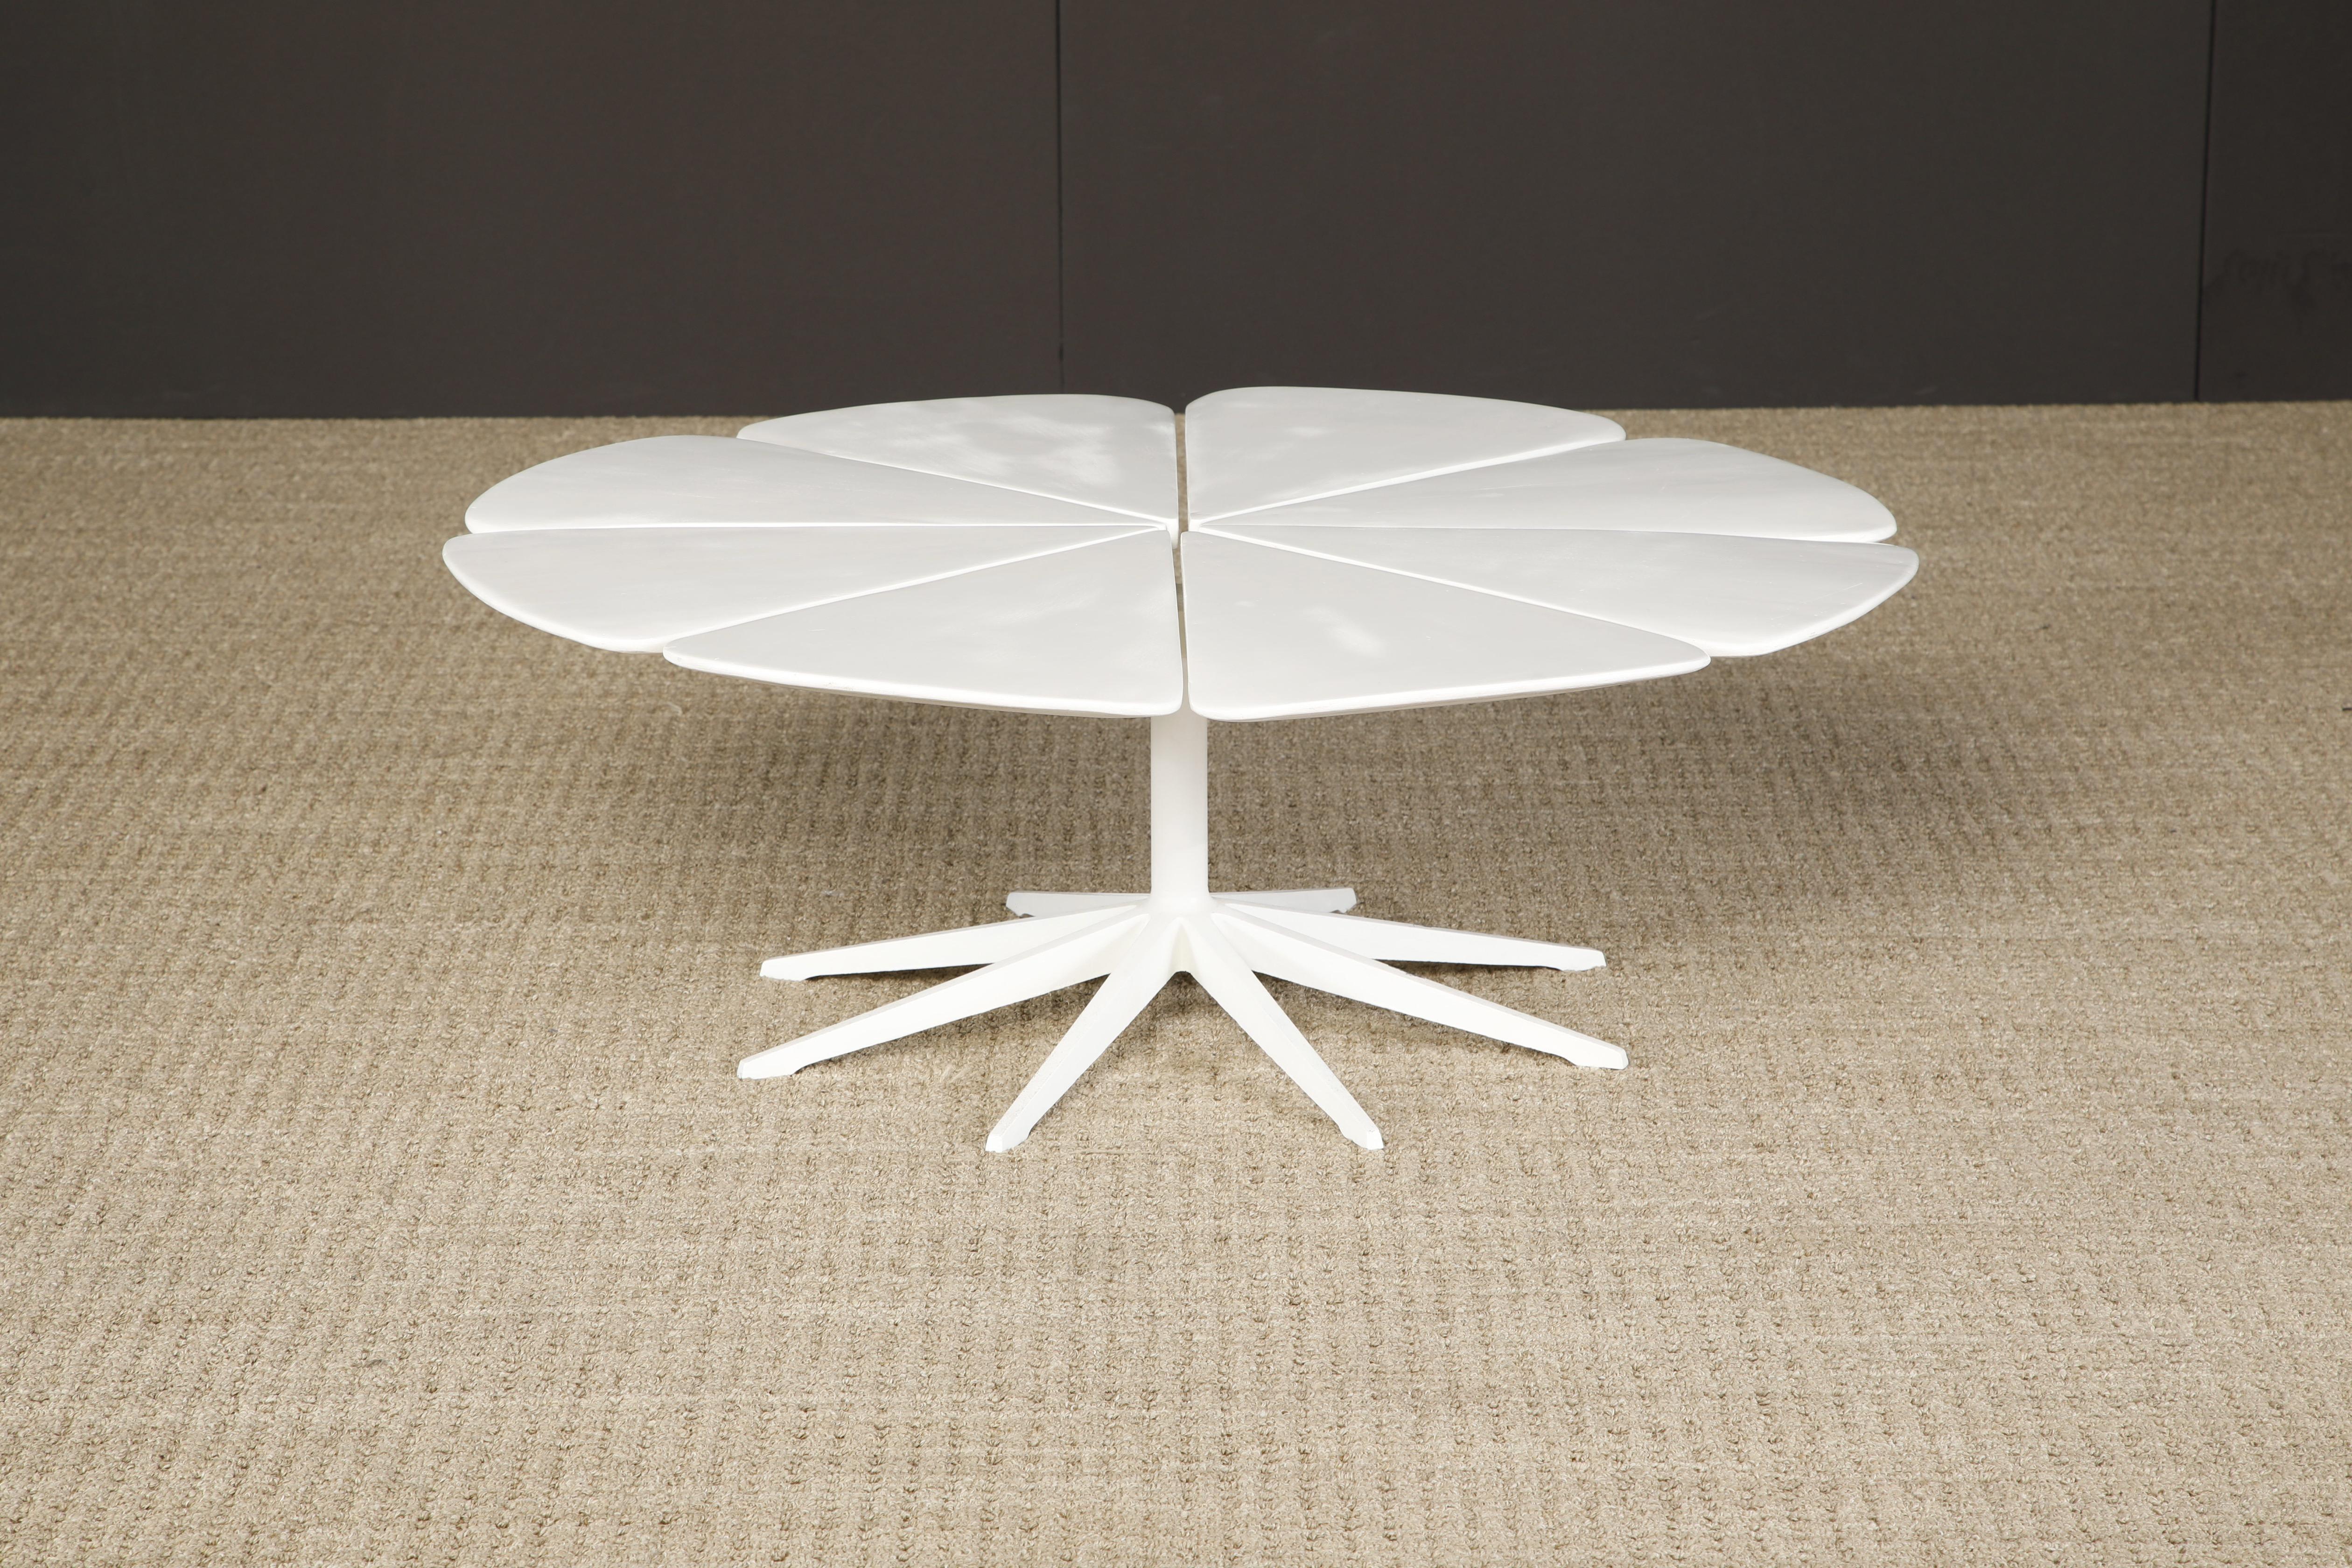 Mid-Century Modern 'Petal' Coffee Table by Richard Schultz for Knoll International, 1960 For Sale